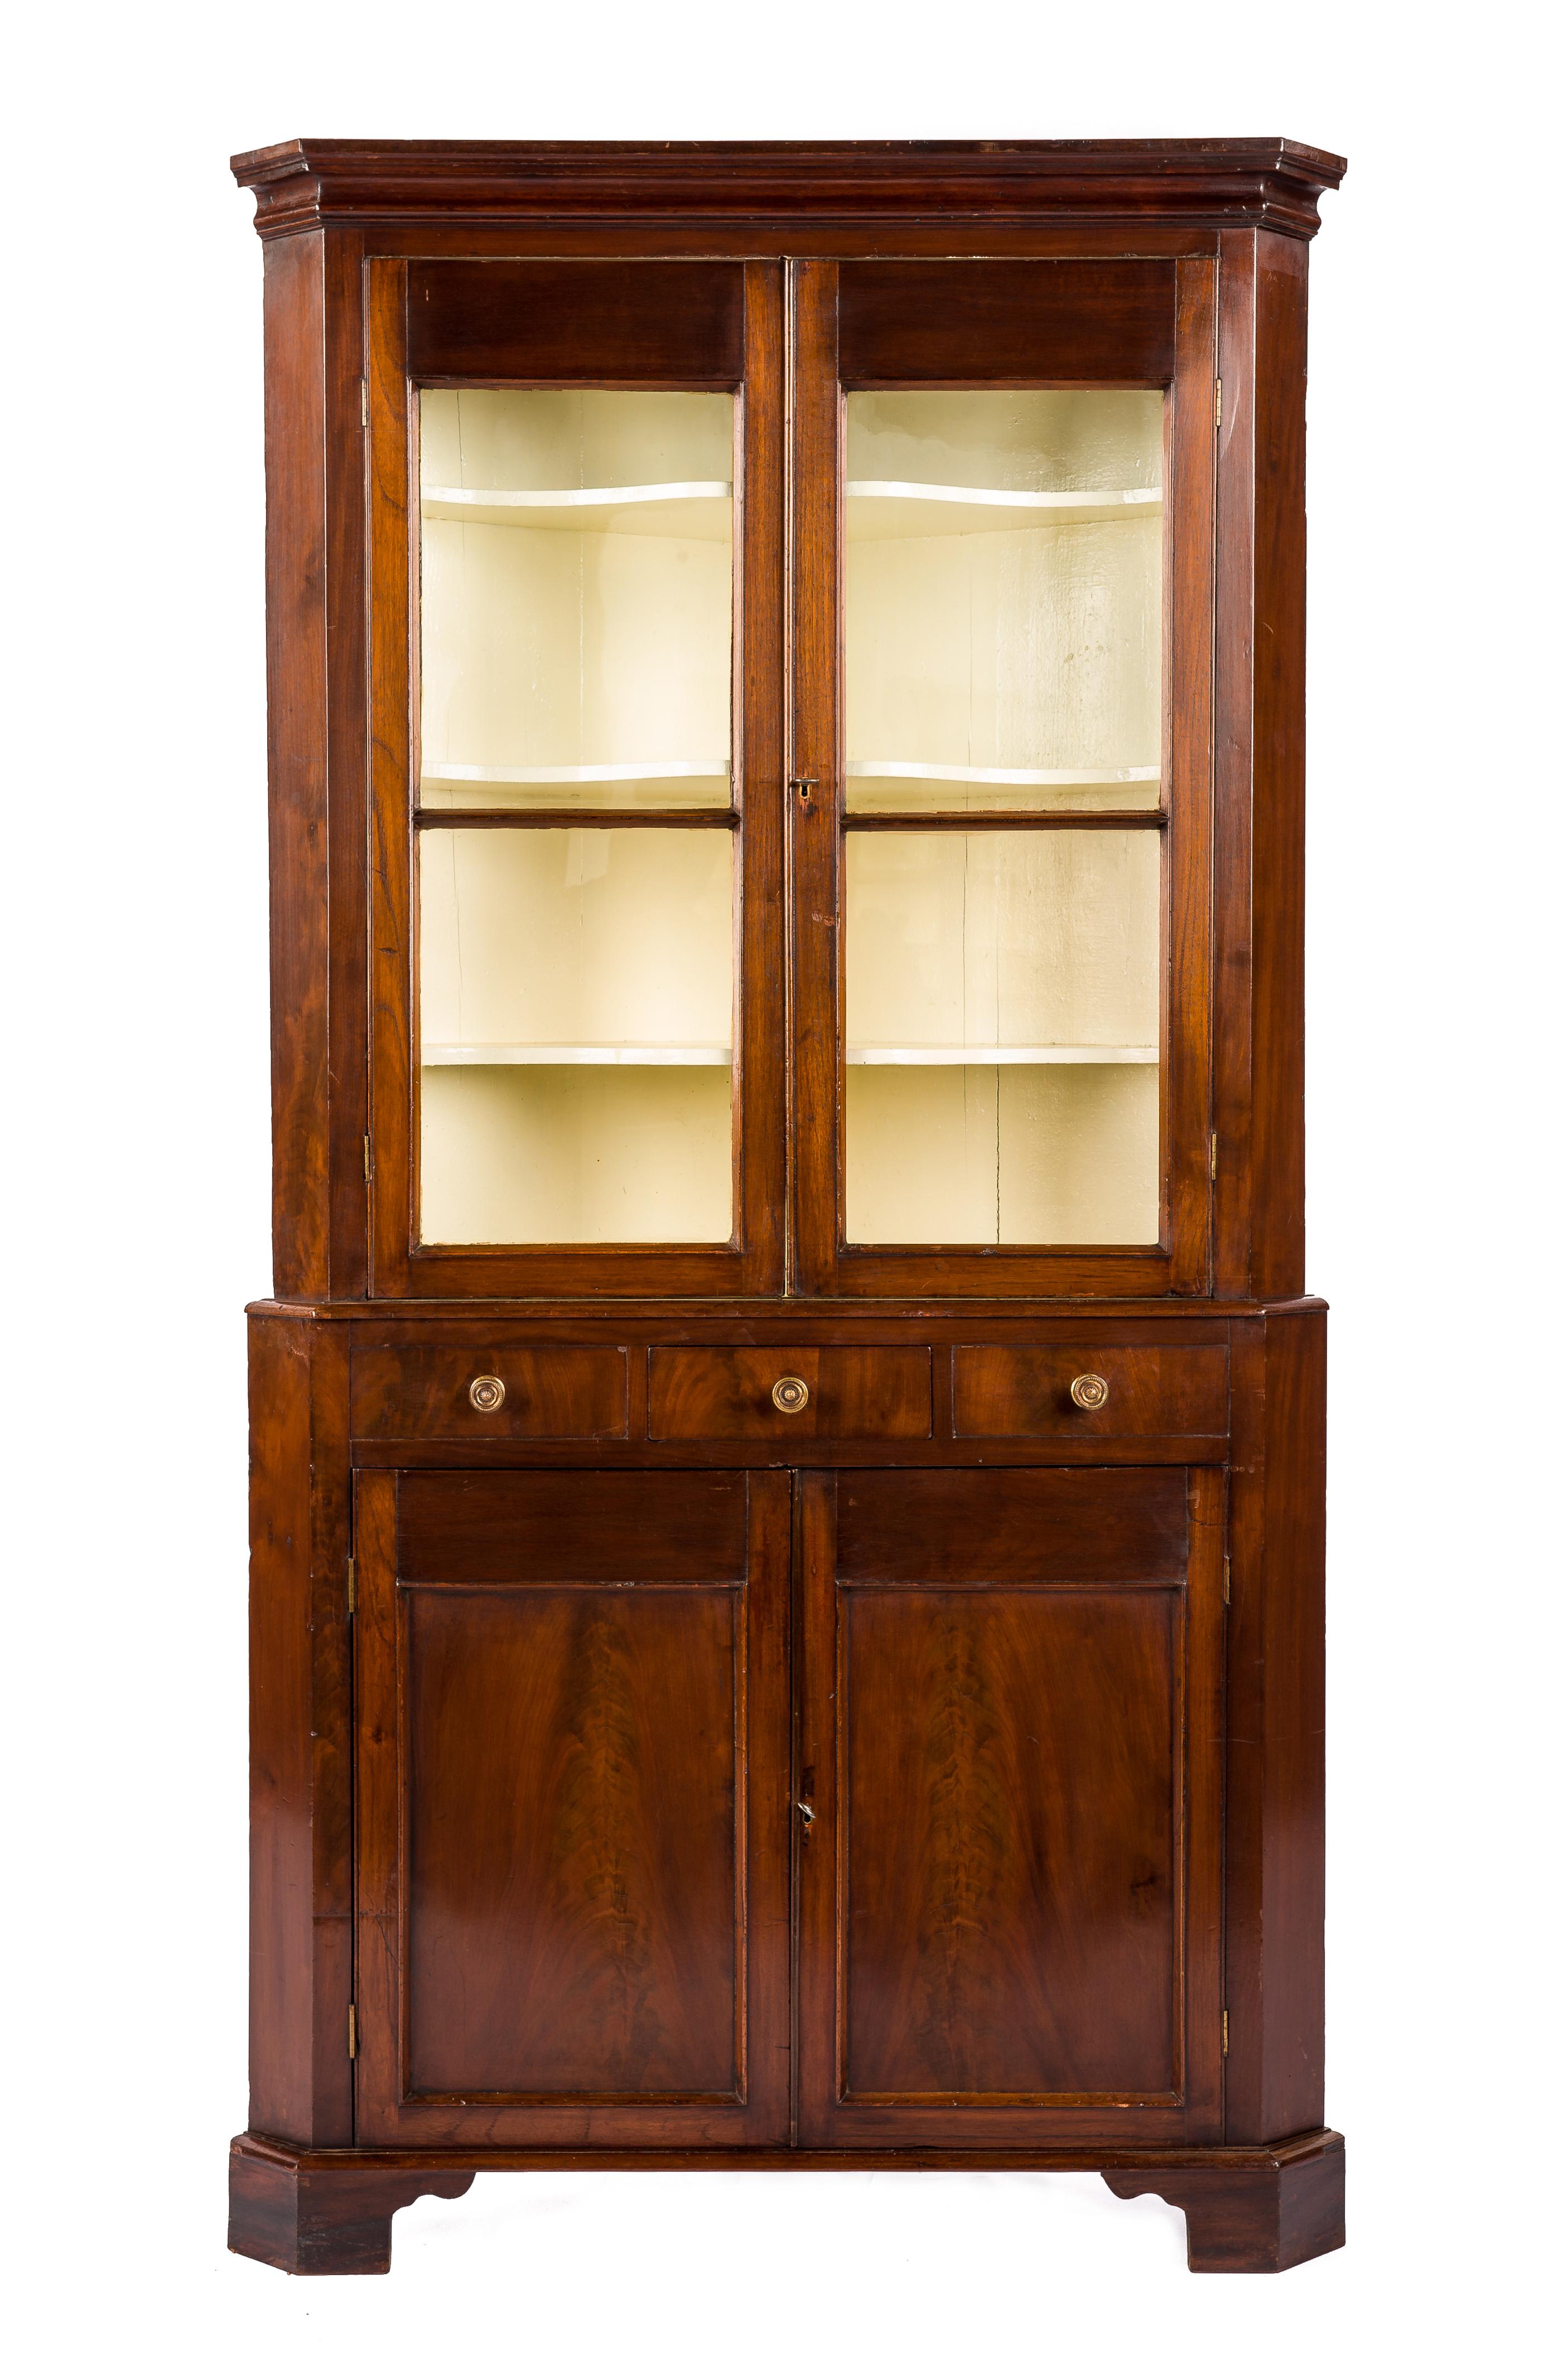 This beautiful antique glazed corner cupboard was made in the United Kingdom in the early 19th century circa 1820. The cupboard breaks down into a lower and an upper cabinet. The lower cabinet is 37 inches high and features three drawers over two